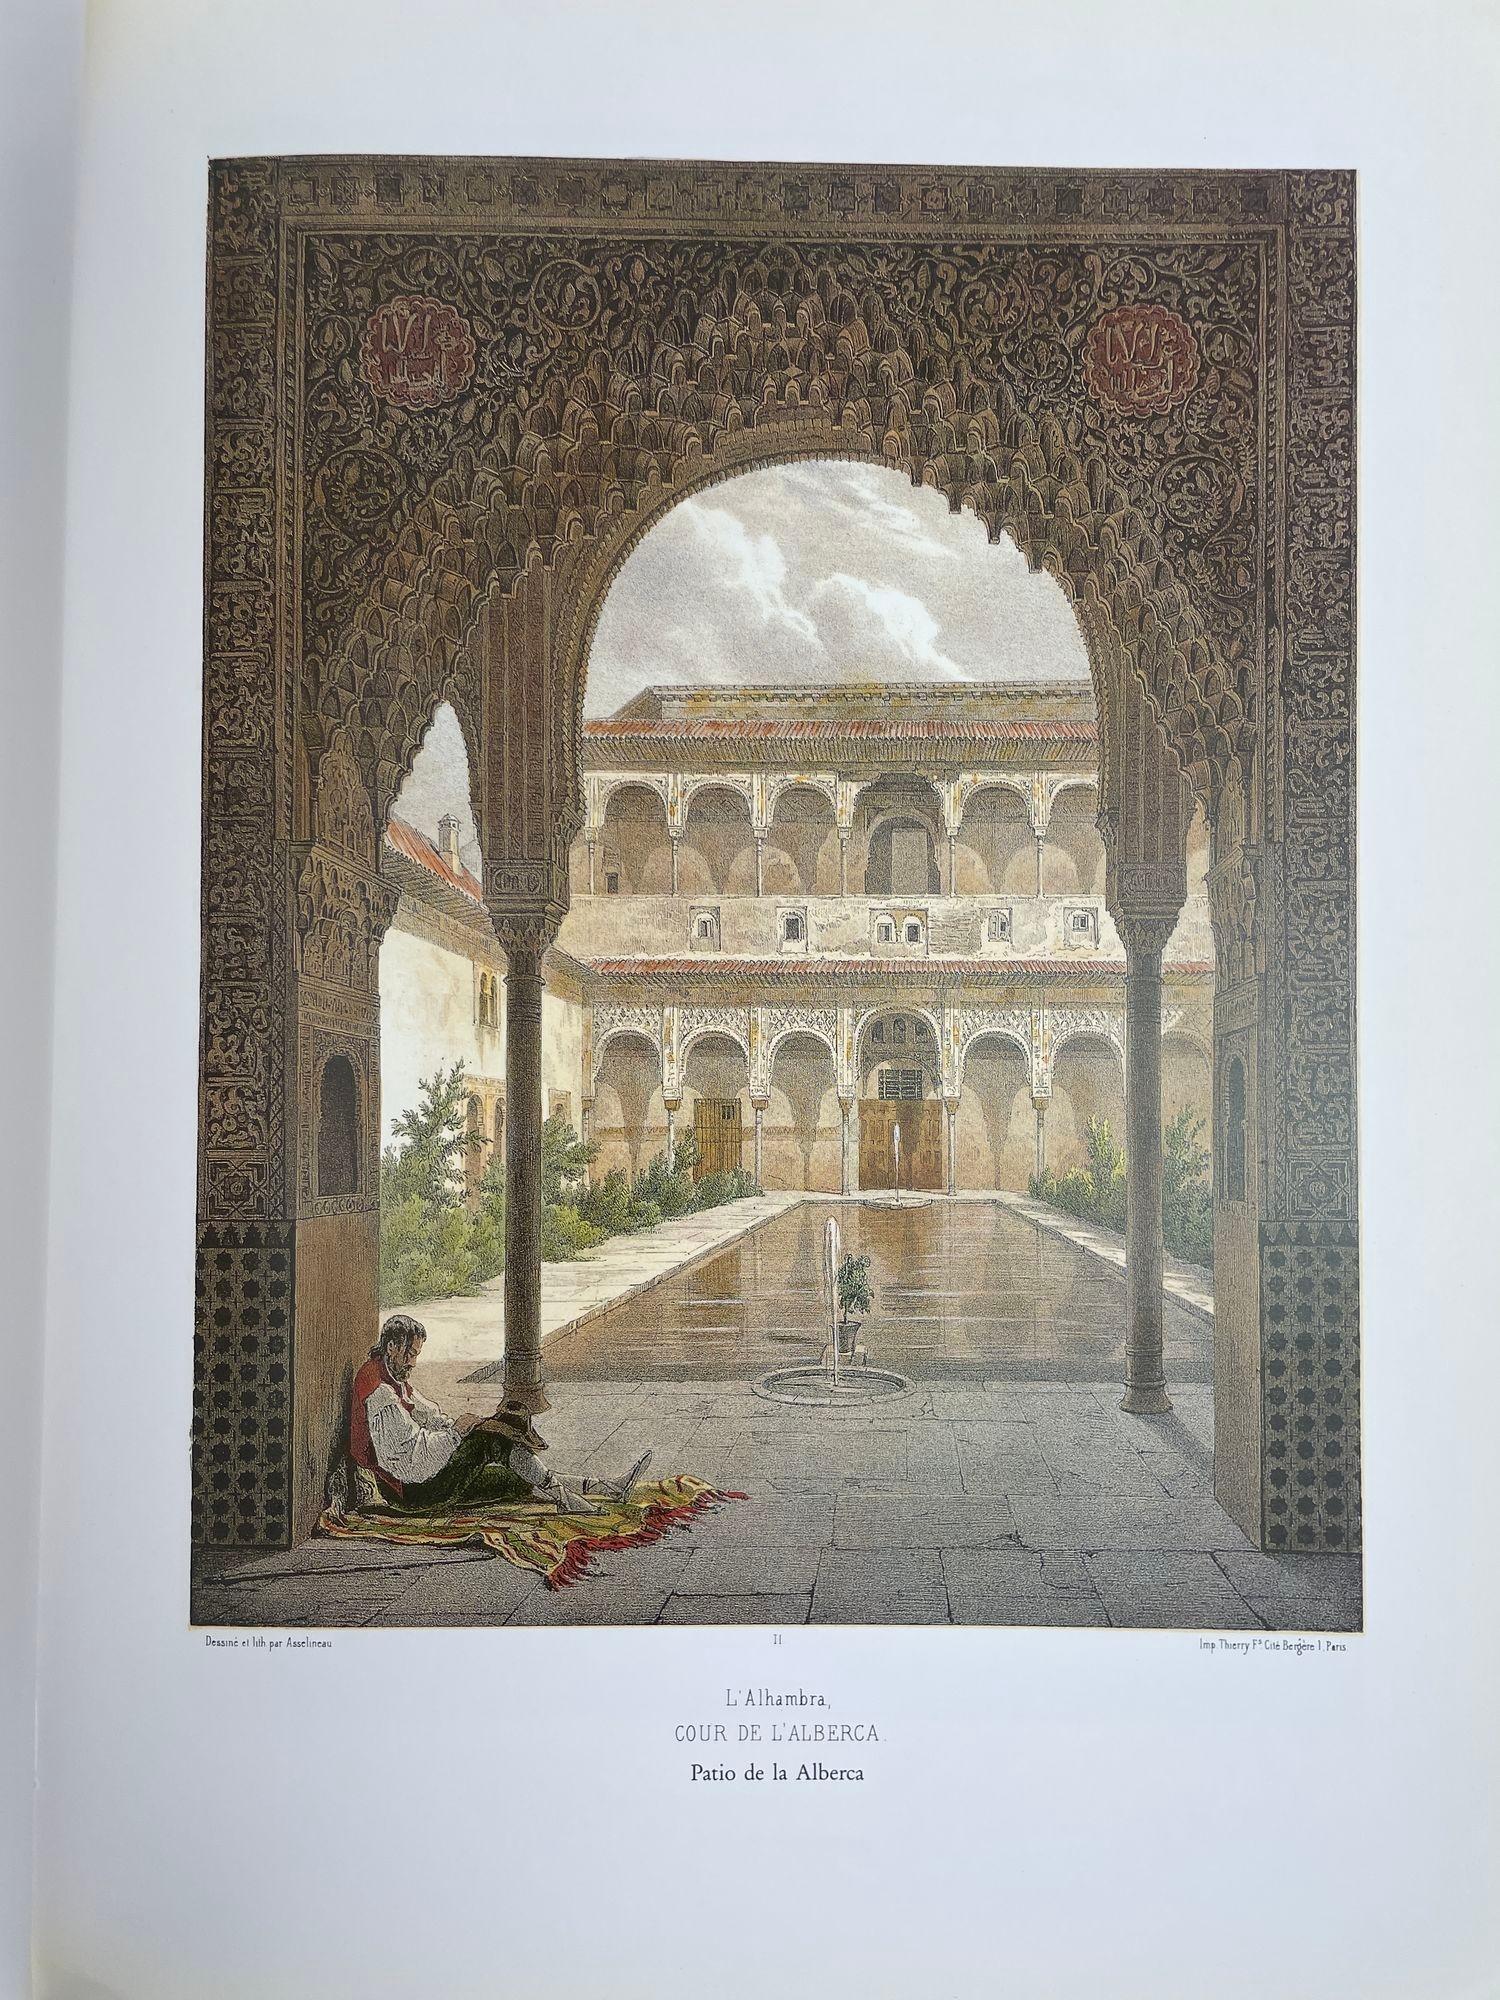 La Alhambra By Isidore Severin-Justin Baron de Taylor In Good Condition For Sale In North Hollywood, CA